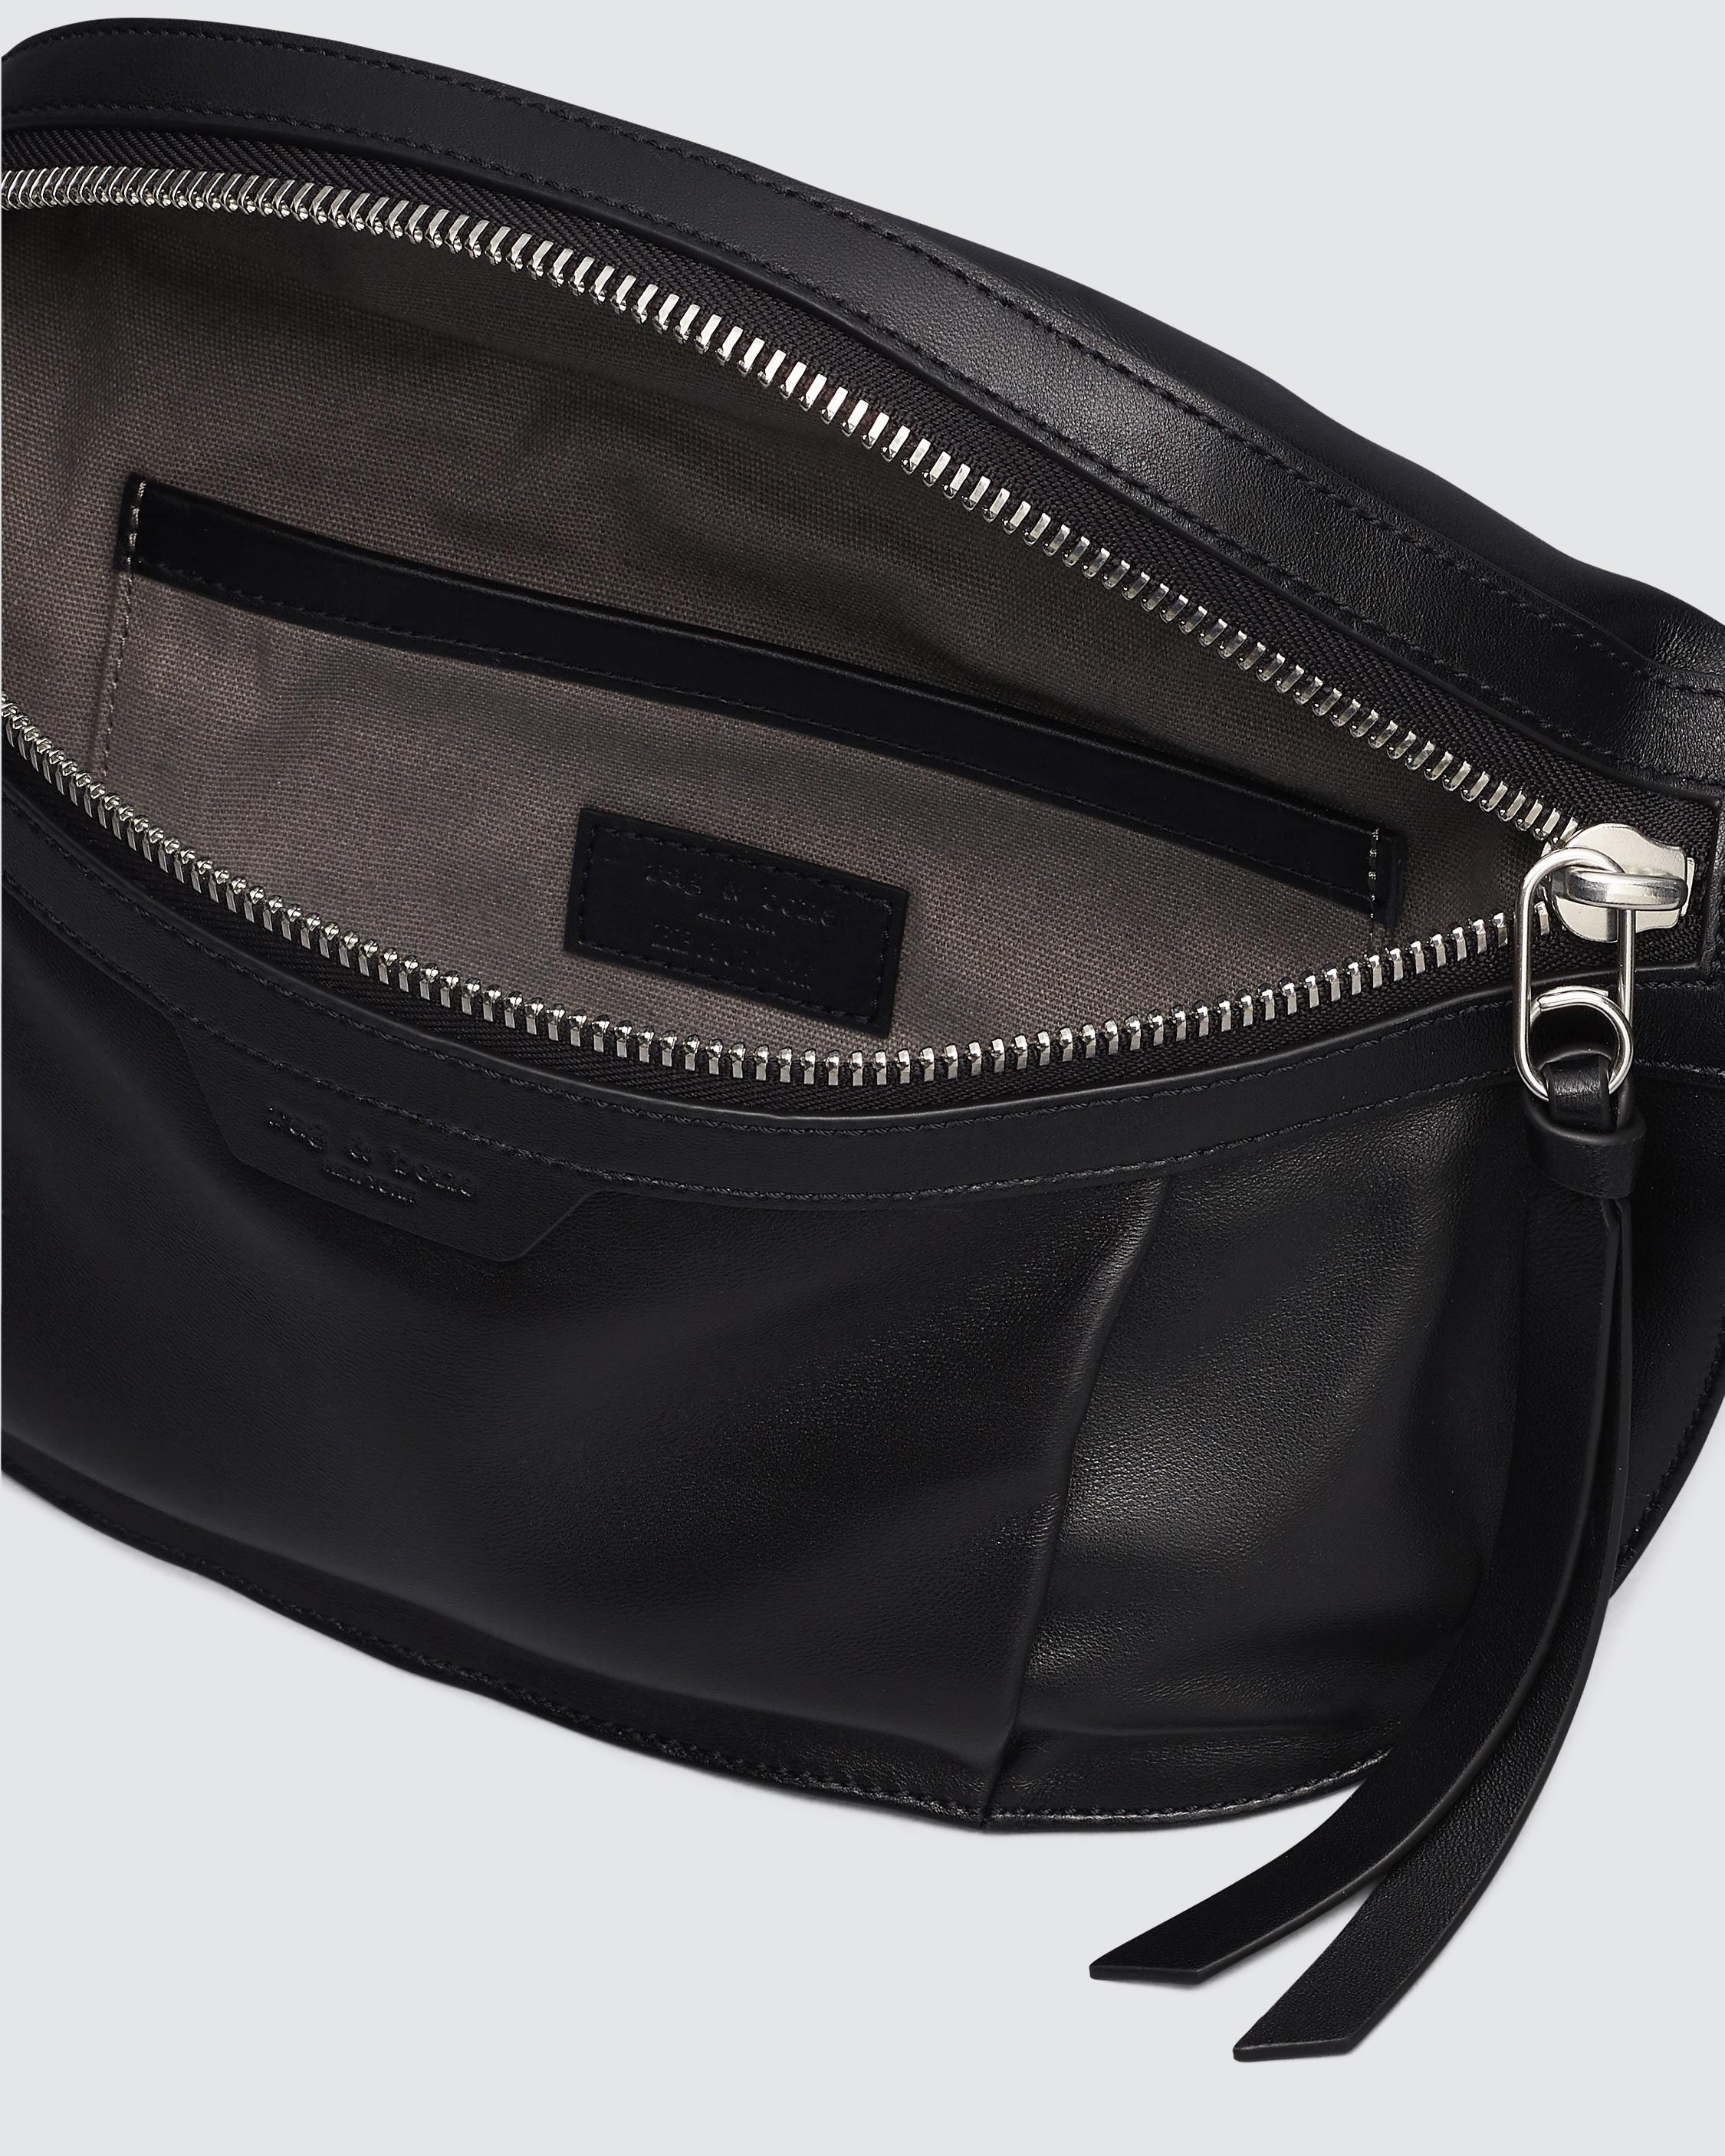 Commuter Fanny Pack - Leather
Small Fanny Pack - 4